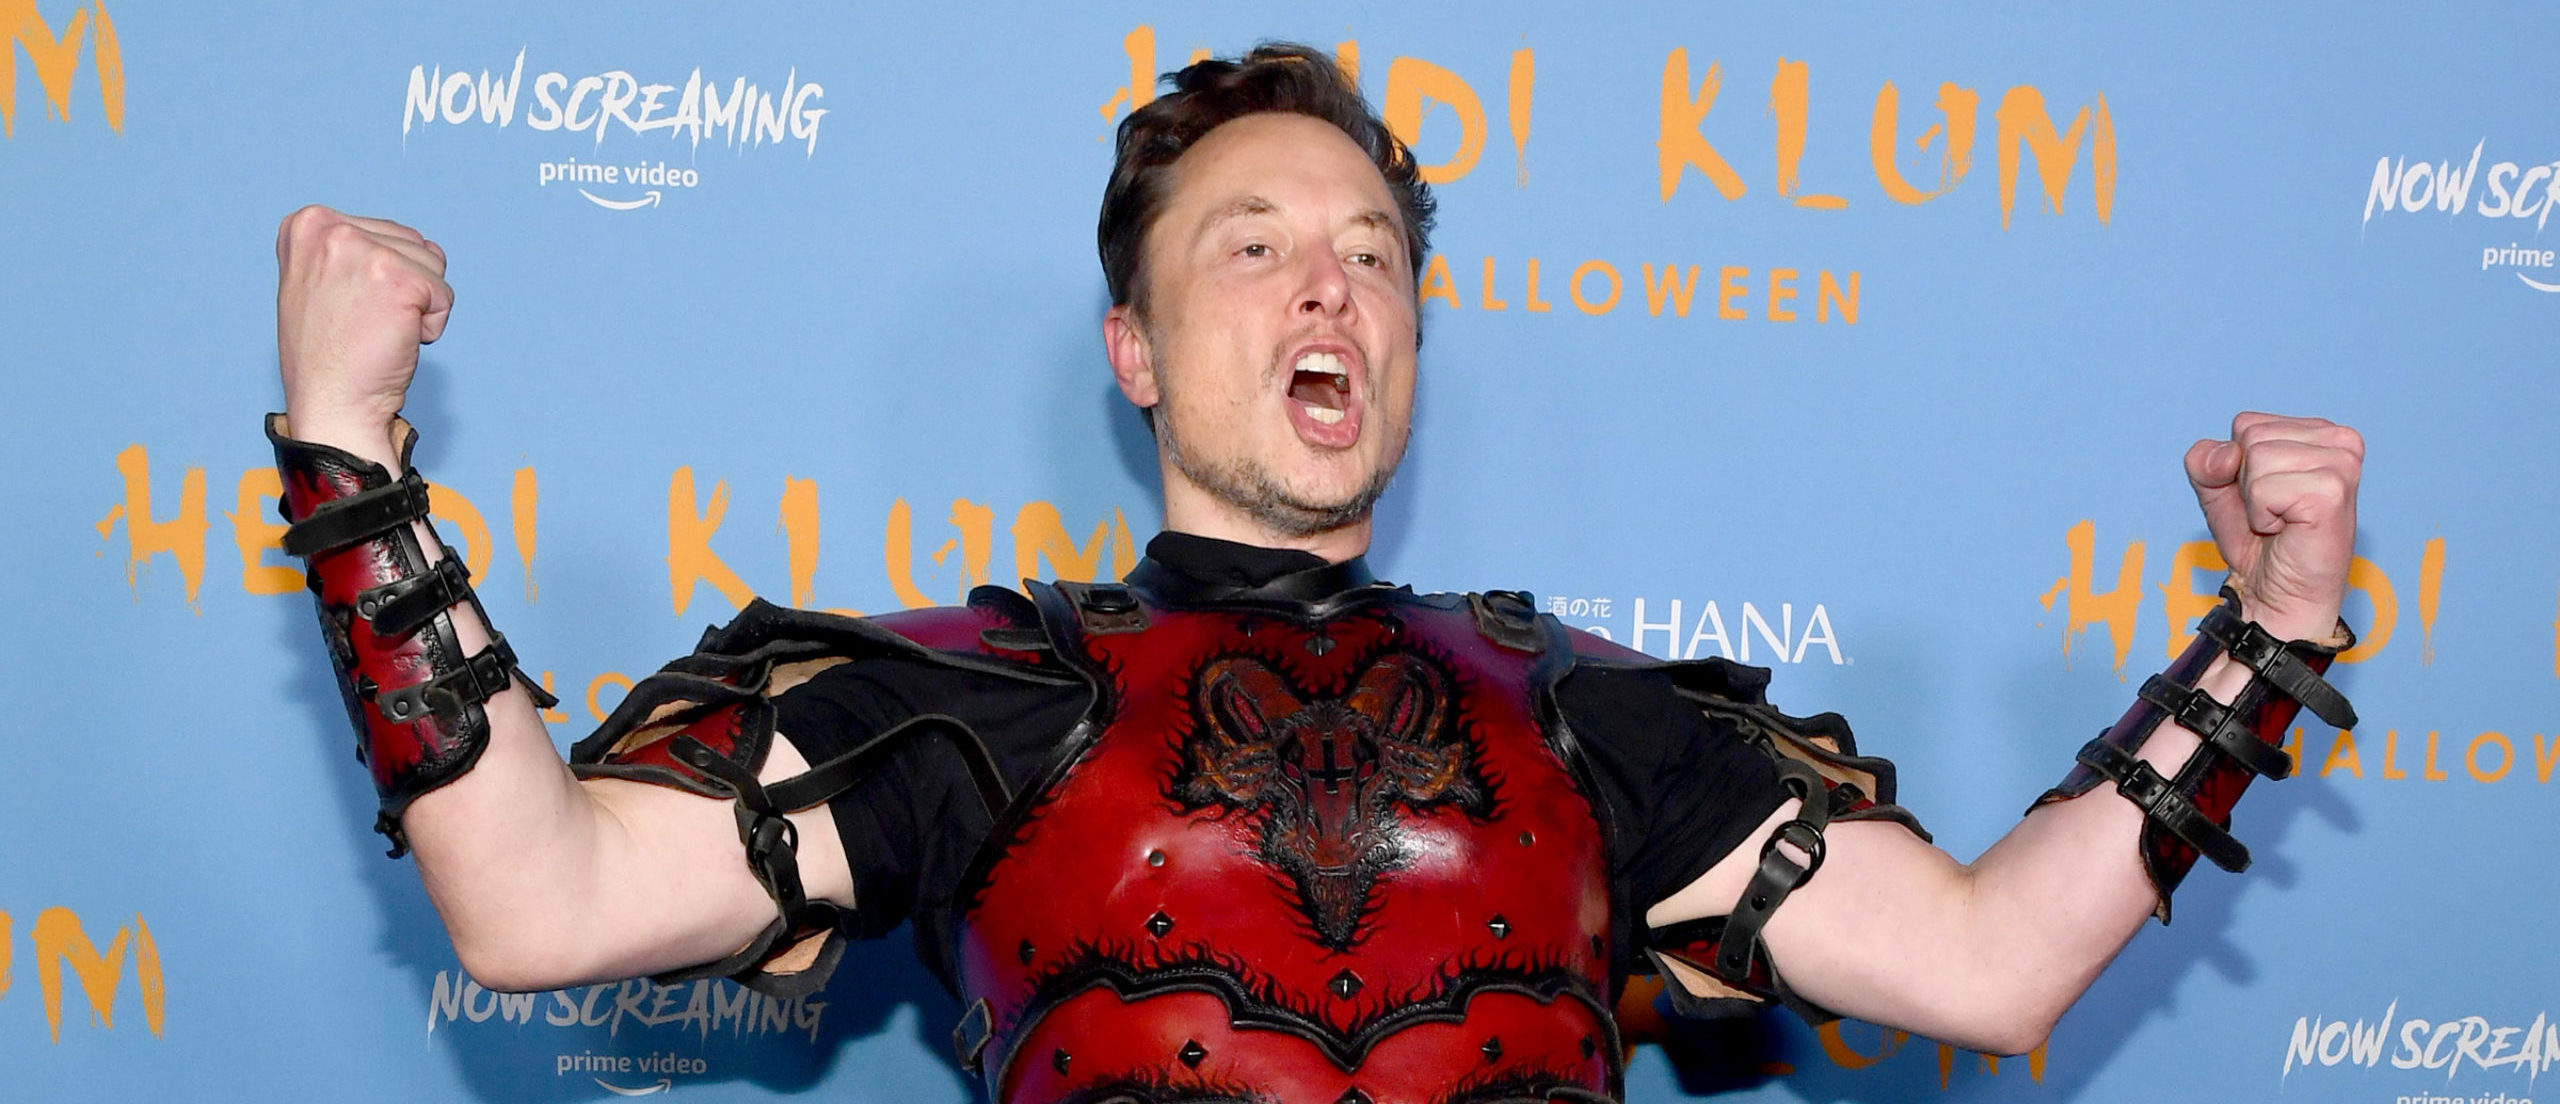 NEW YORK, NEW YORK - OCTOBER 31: Elon Musk attends Heidi Klum's 21st Annual Halloween Party presented by Now Screaming x Prime Video and Baileys Irish Cream Liqueur at Sake No Hana at Moxy Lower East Side on October 31, 2022 in New York City. (Photo by Noam Galai/Getty Images for Heidi Klum)